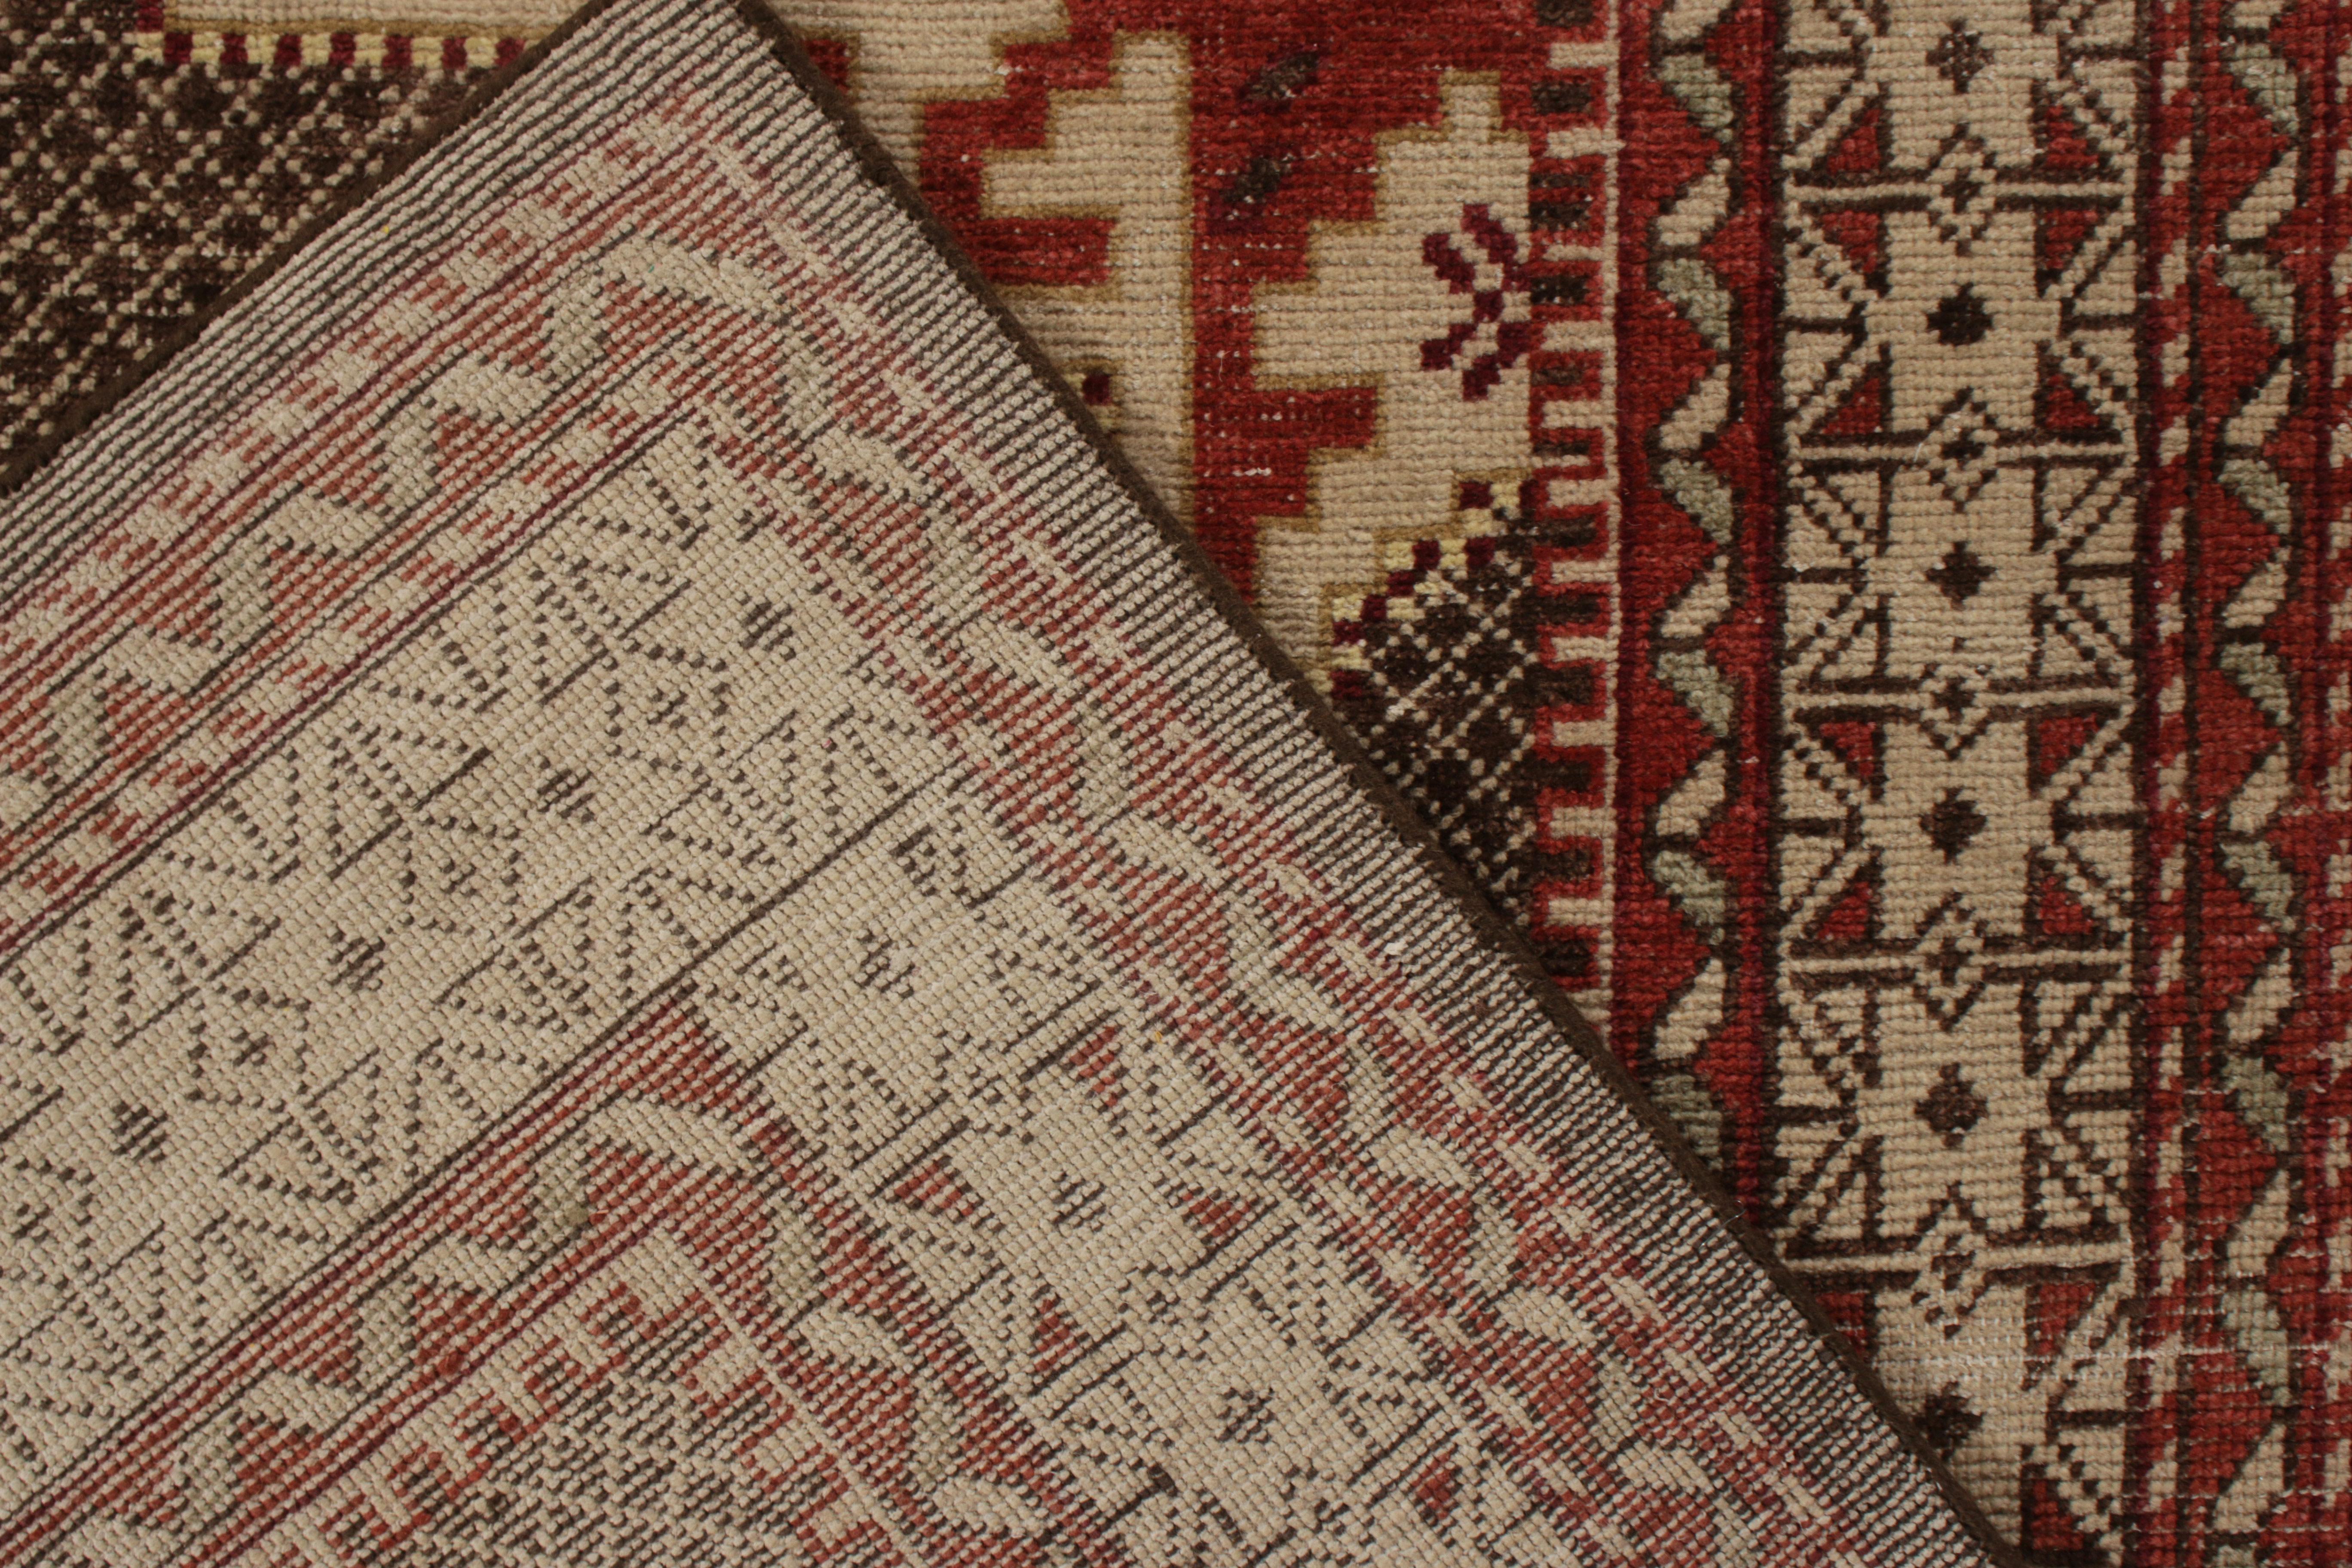 Hand-Knotted Rug & Kilim’s Distressed Kuba Style Rug in Beige-Brown and Red Geometric Pattern For Sale